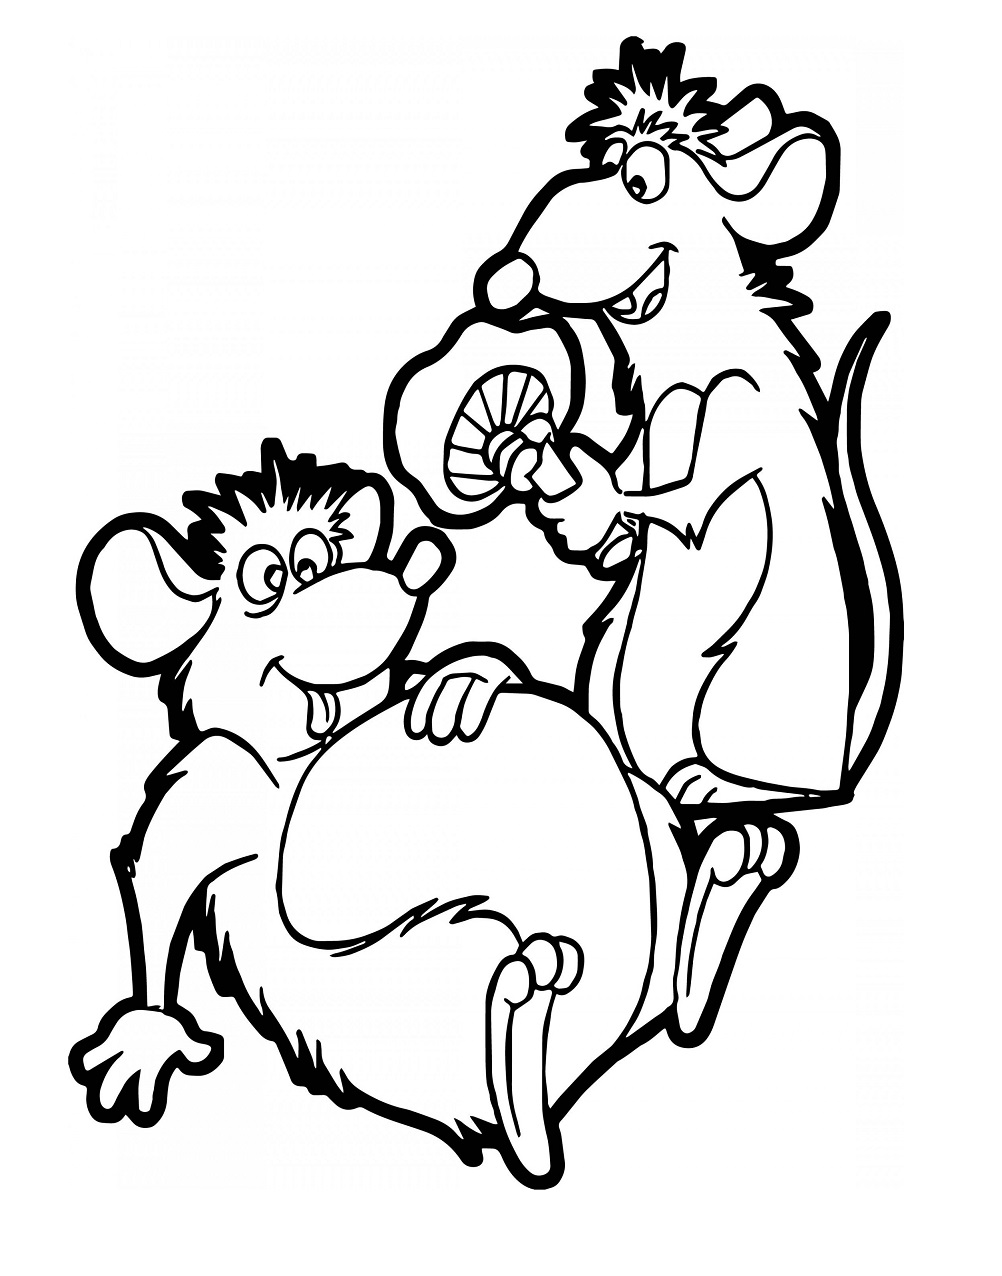 Funny Remy And Emile Coloring Page - Free Printable Coloring Pages for Kids